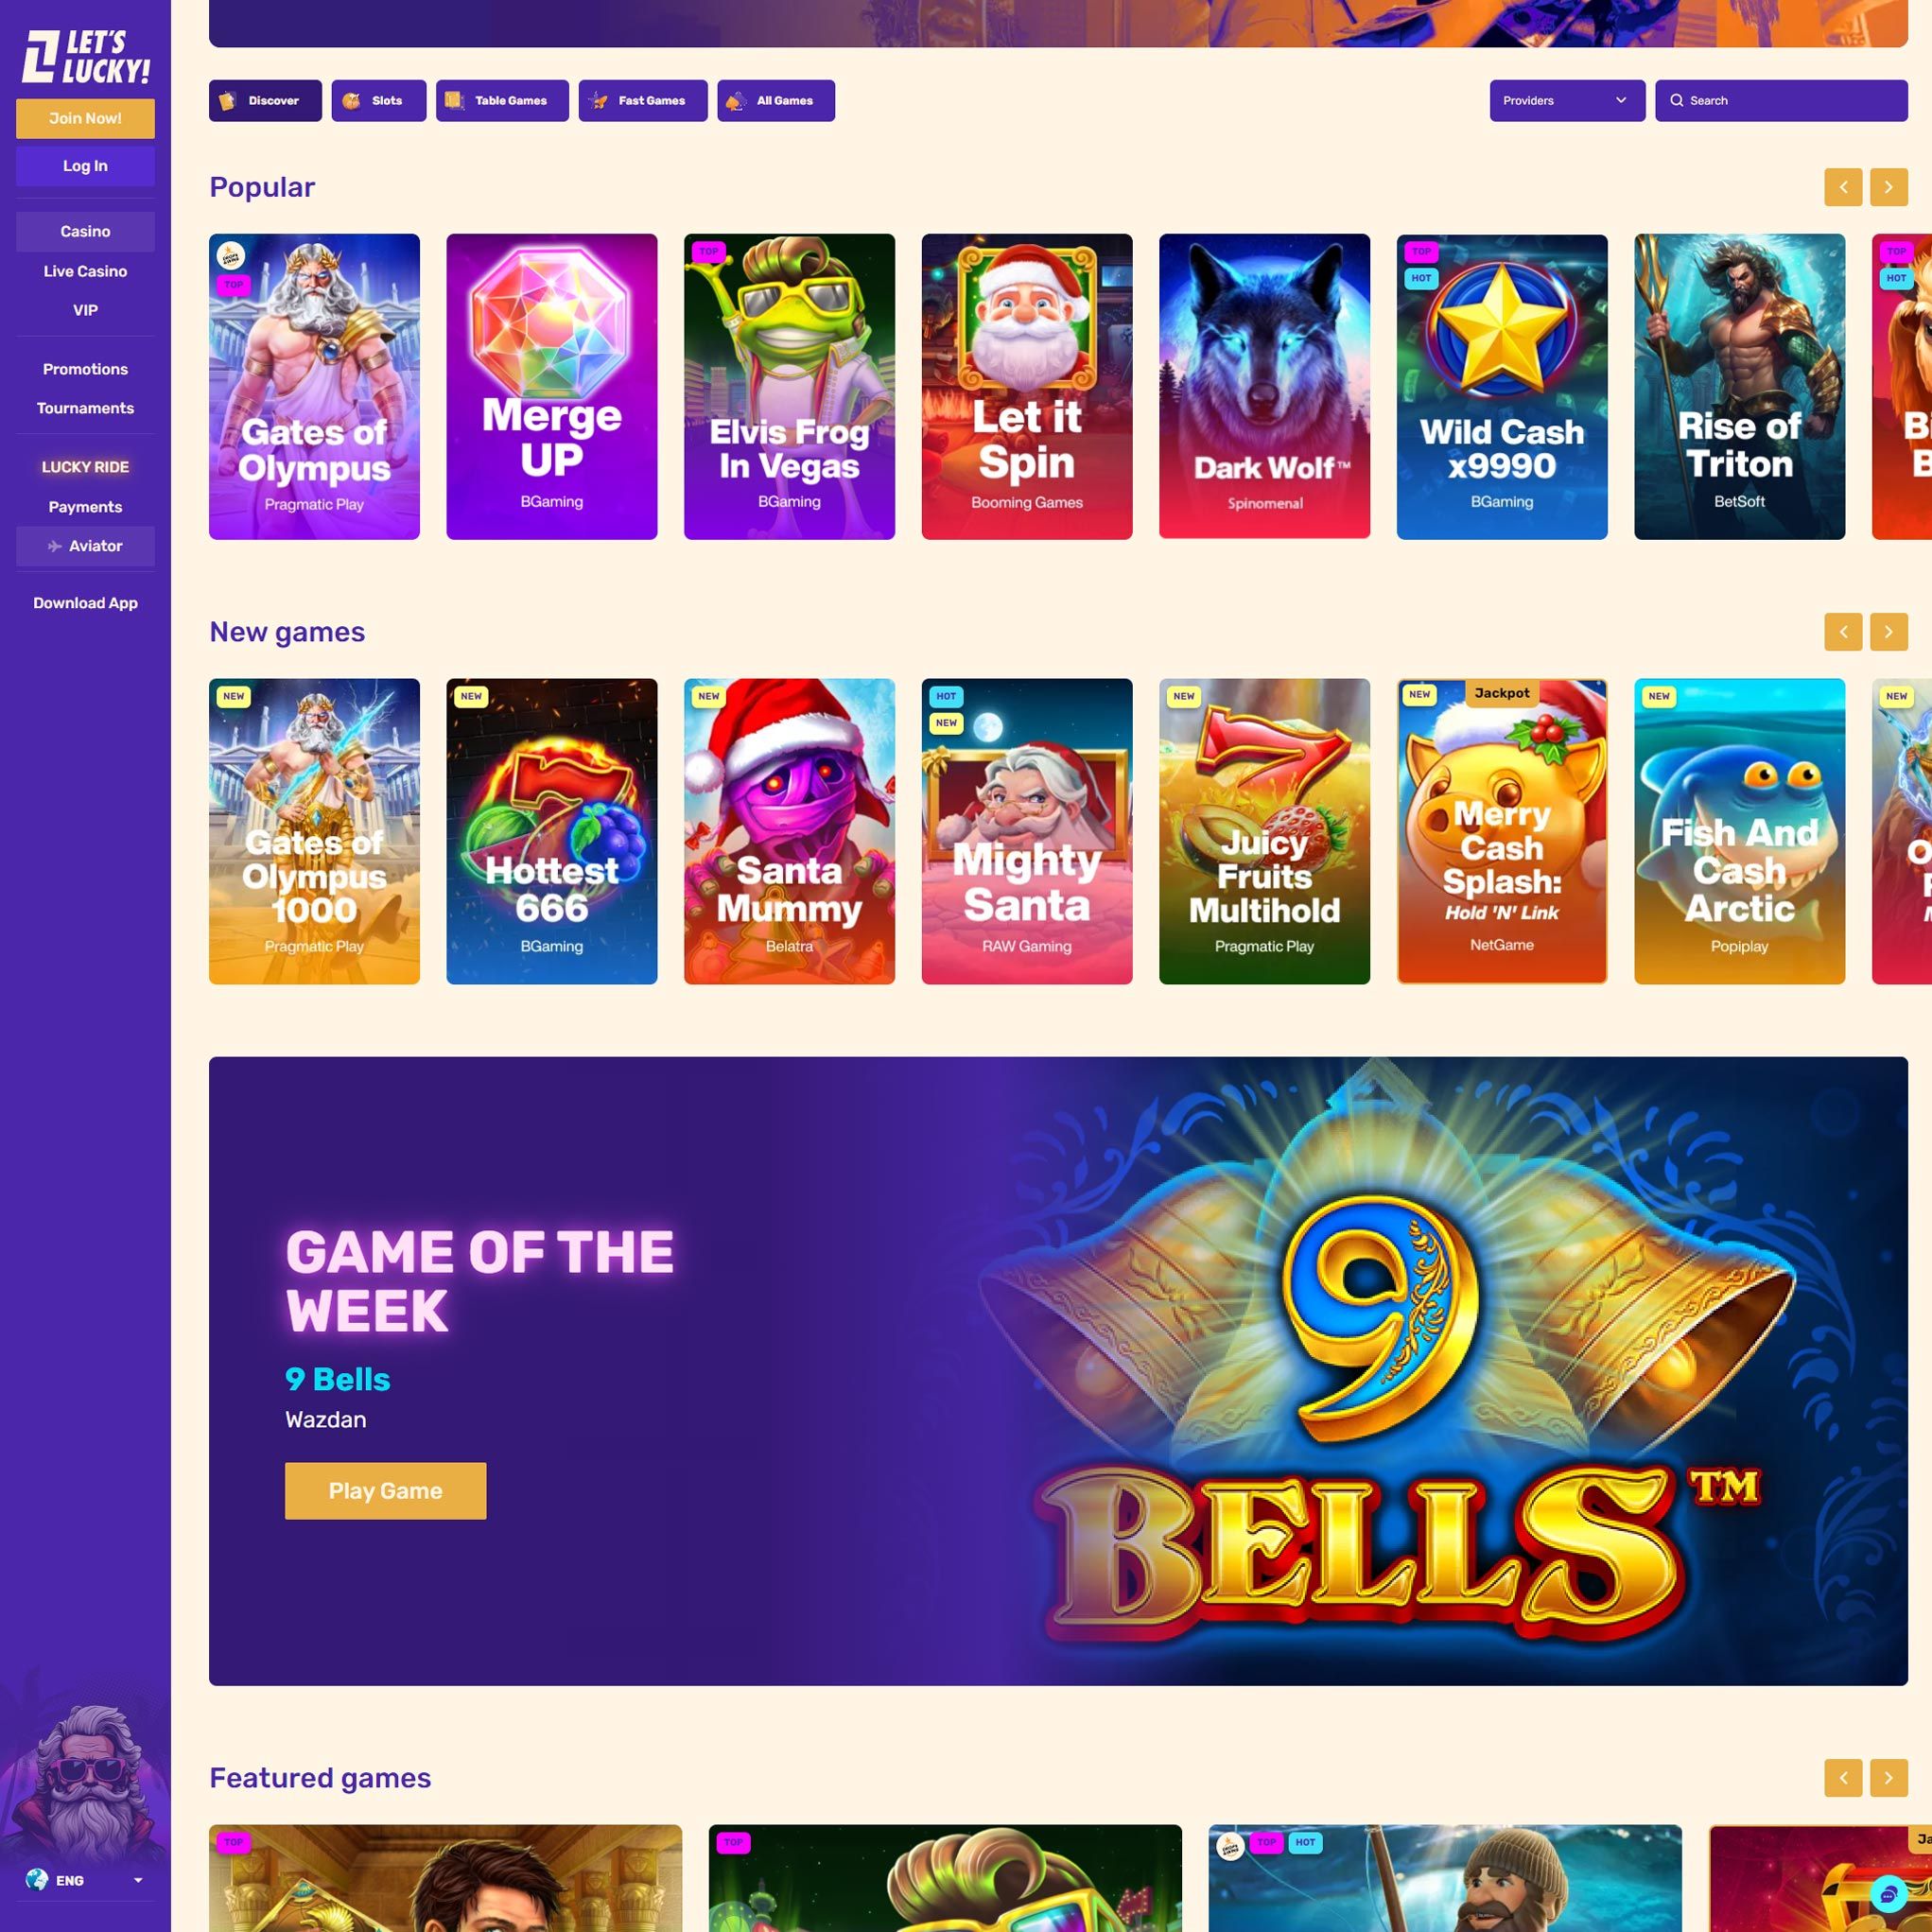 Let's Lucky Casino review by Mr. Gamble